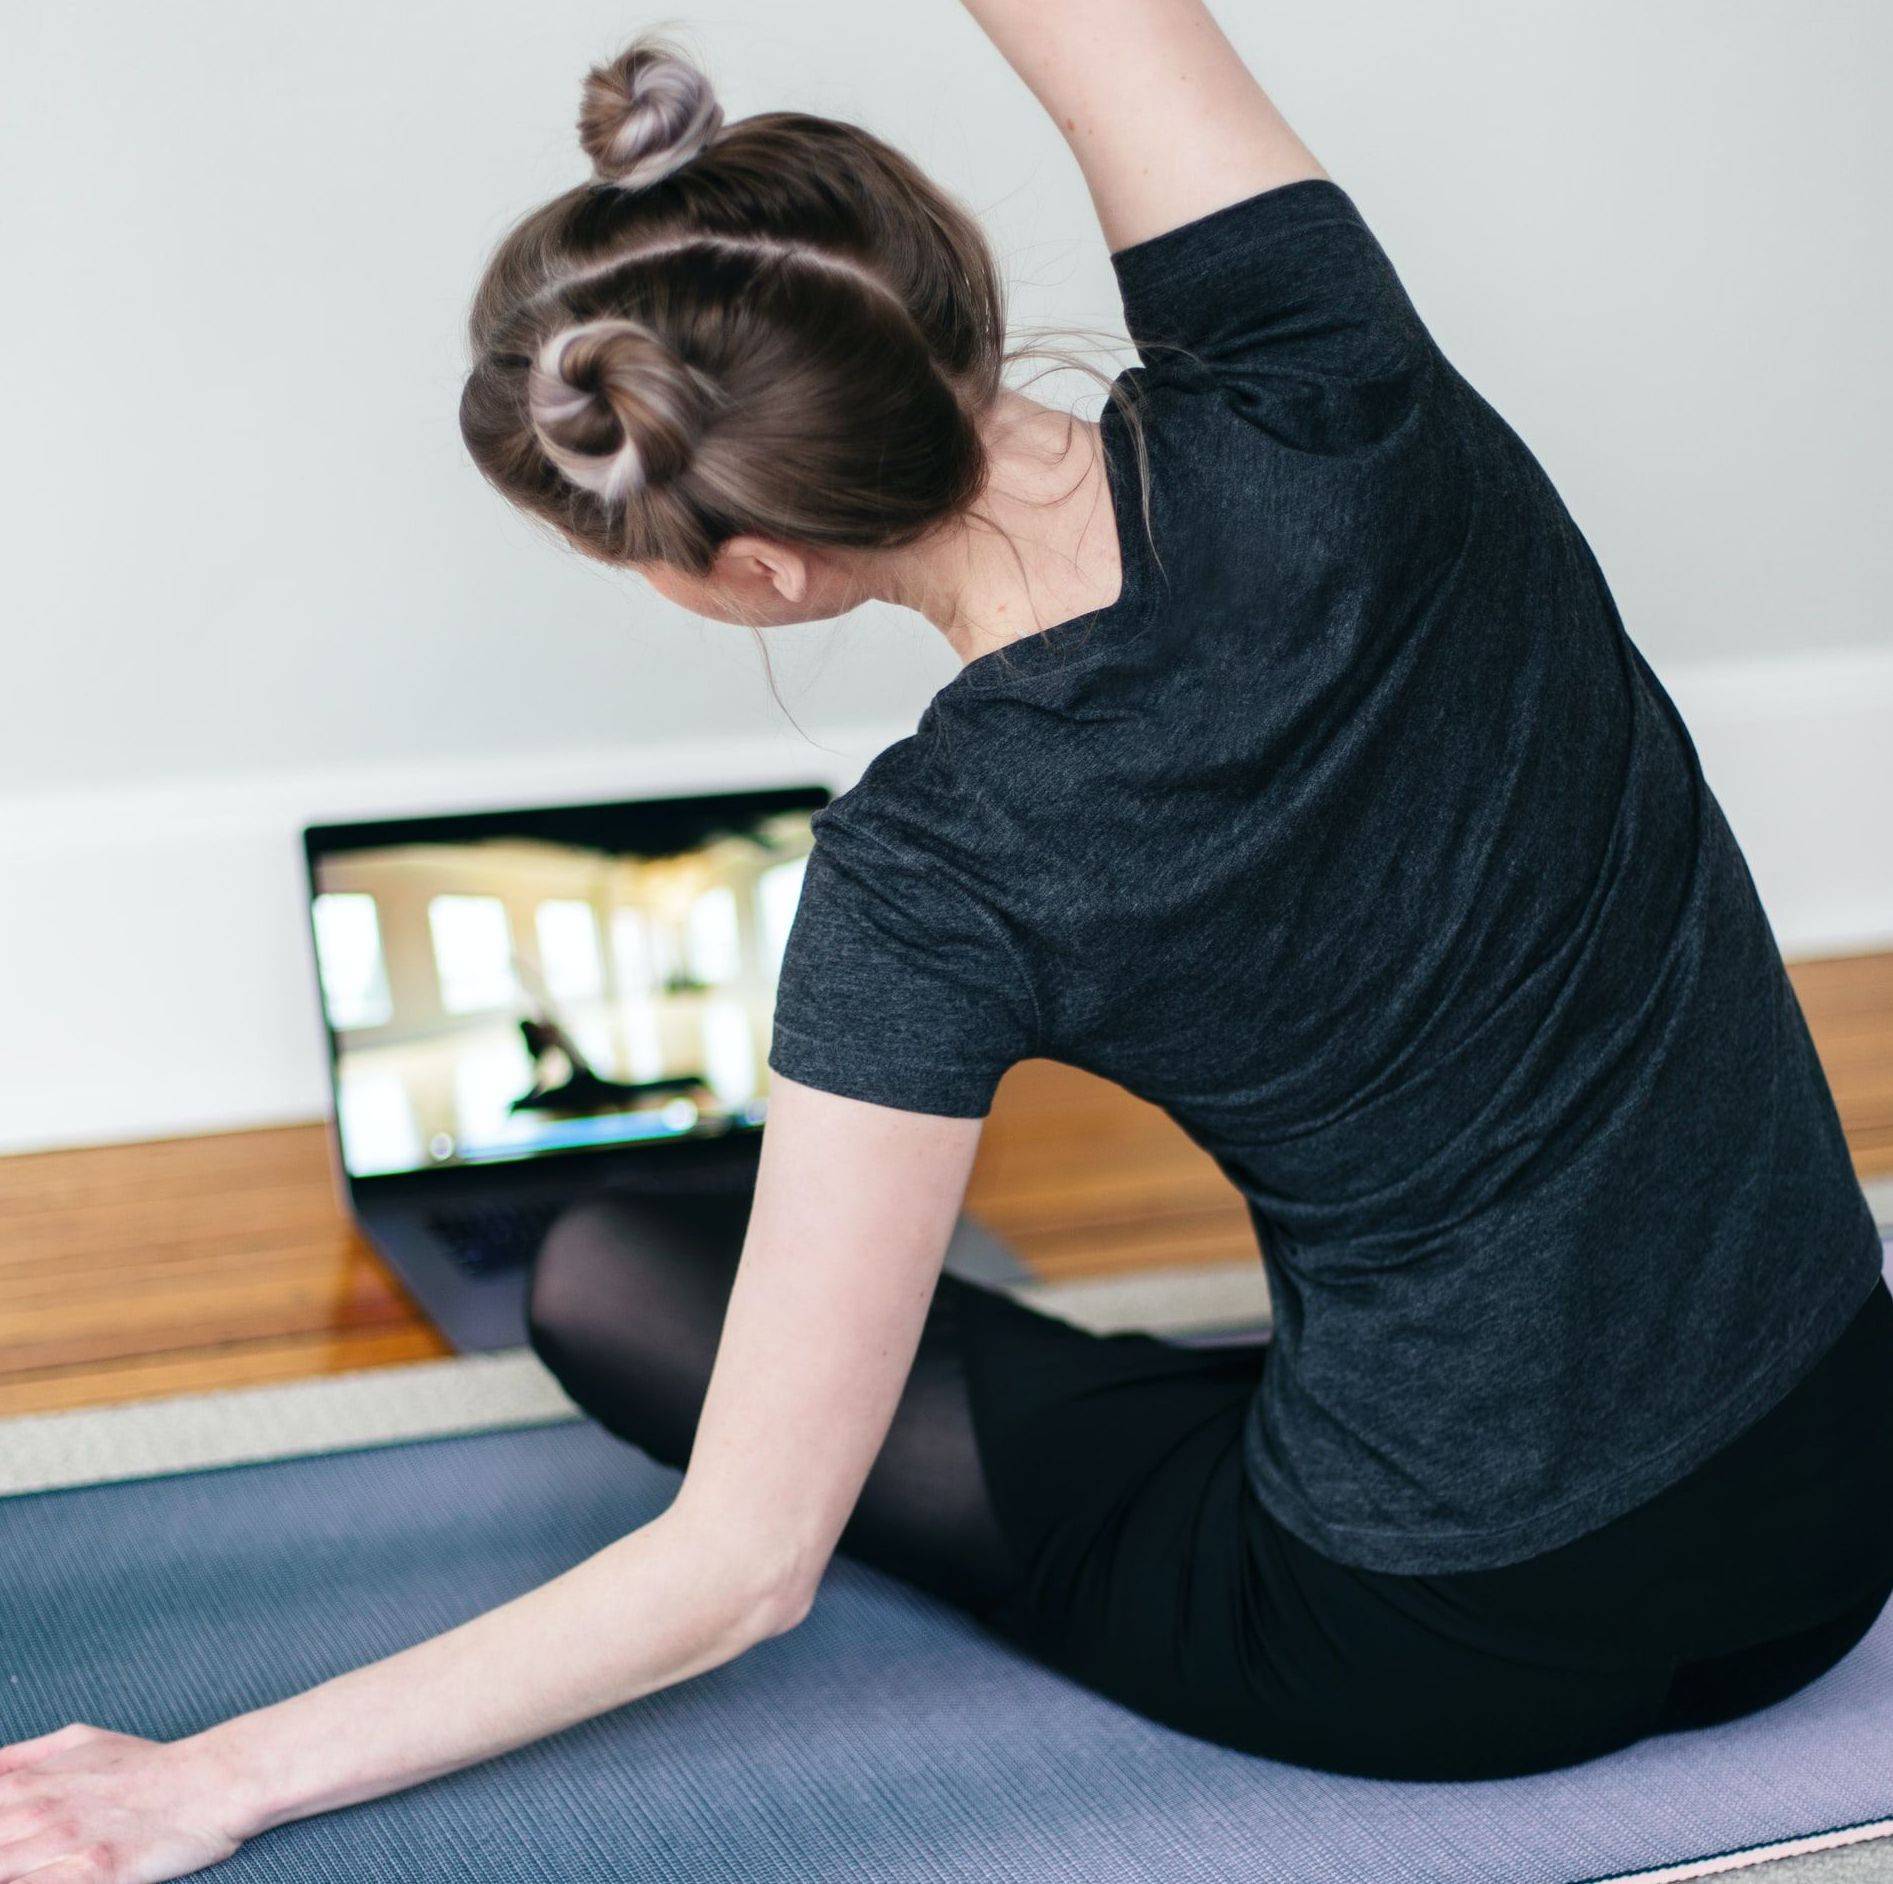 Workout at home with these fascinating online fitness classes